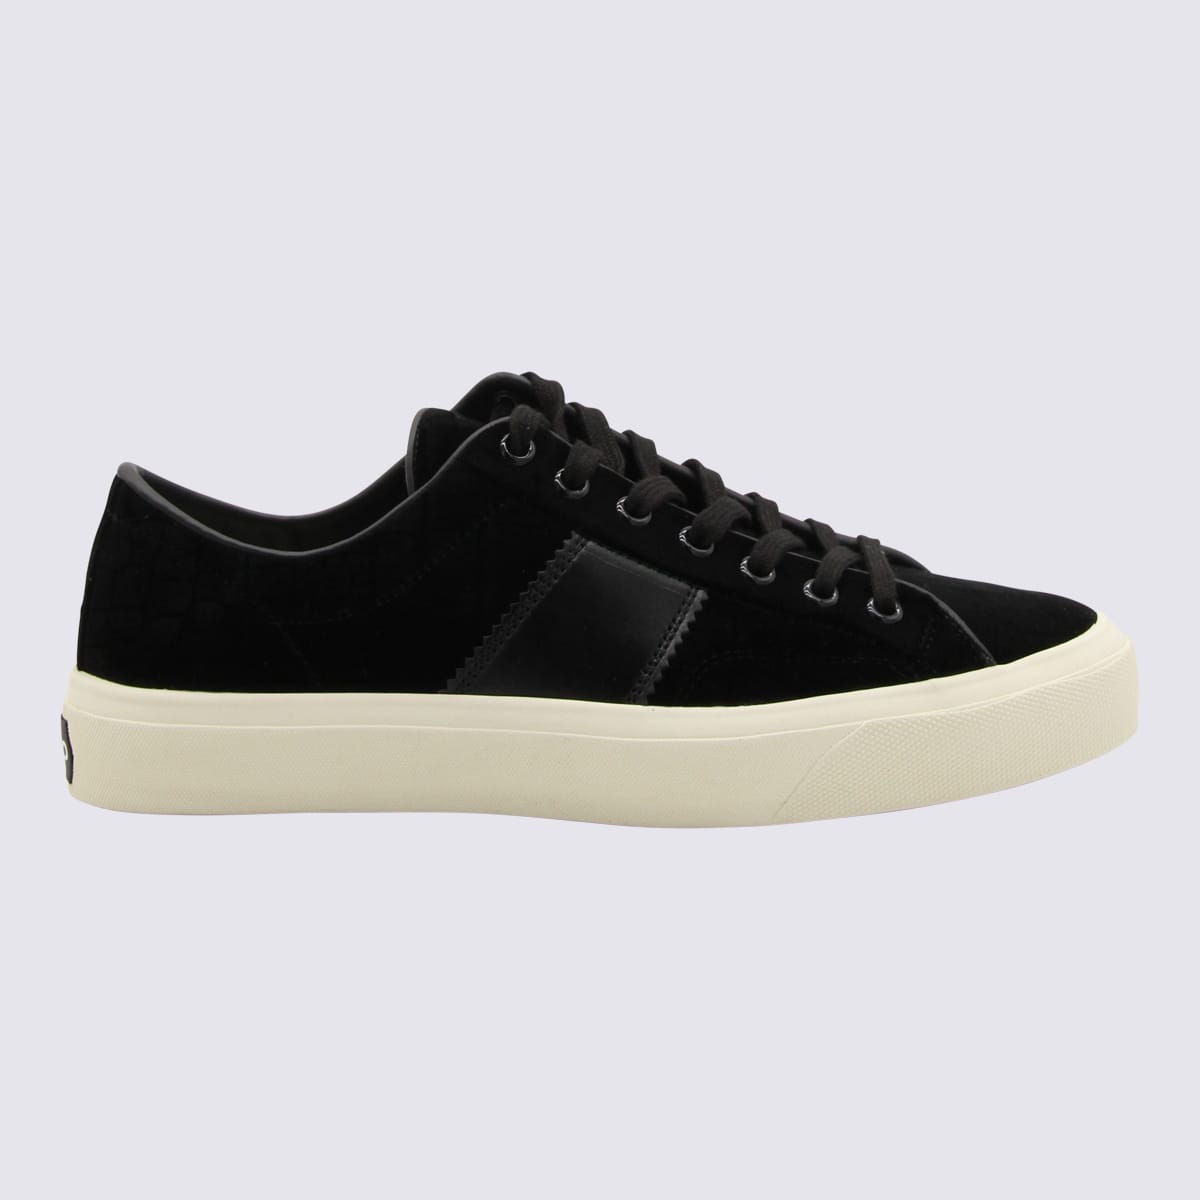 TOM FORD BLACK AND CREAM CAMBRIDGE SNEAKERS